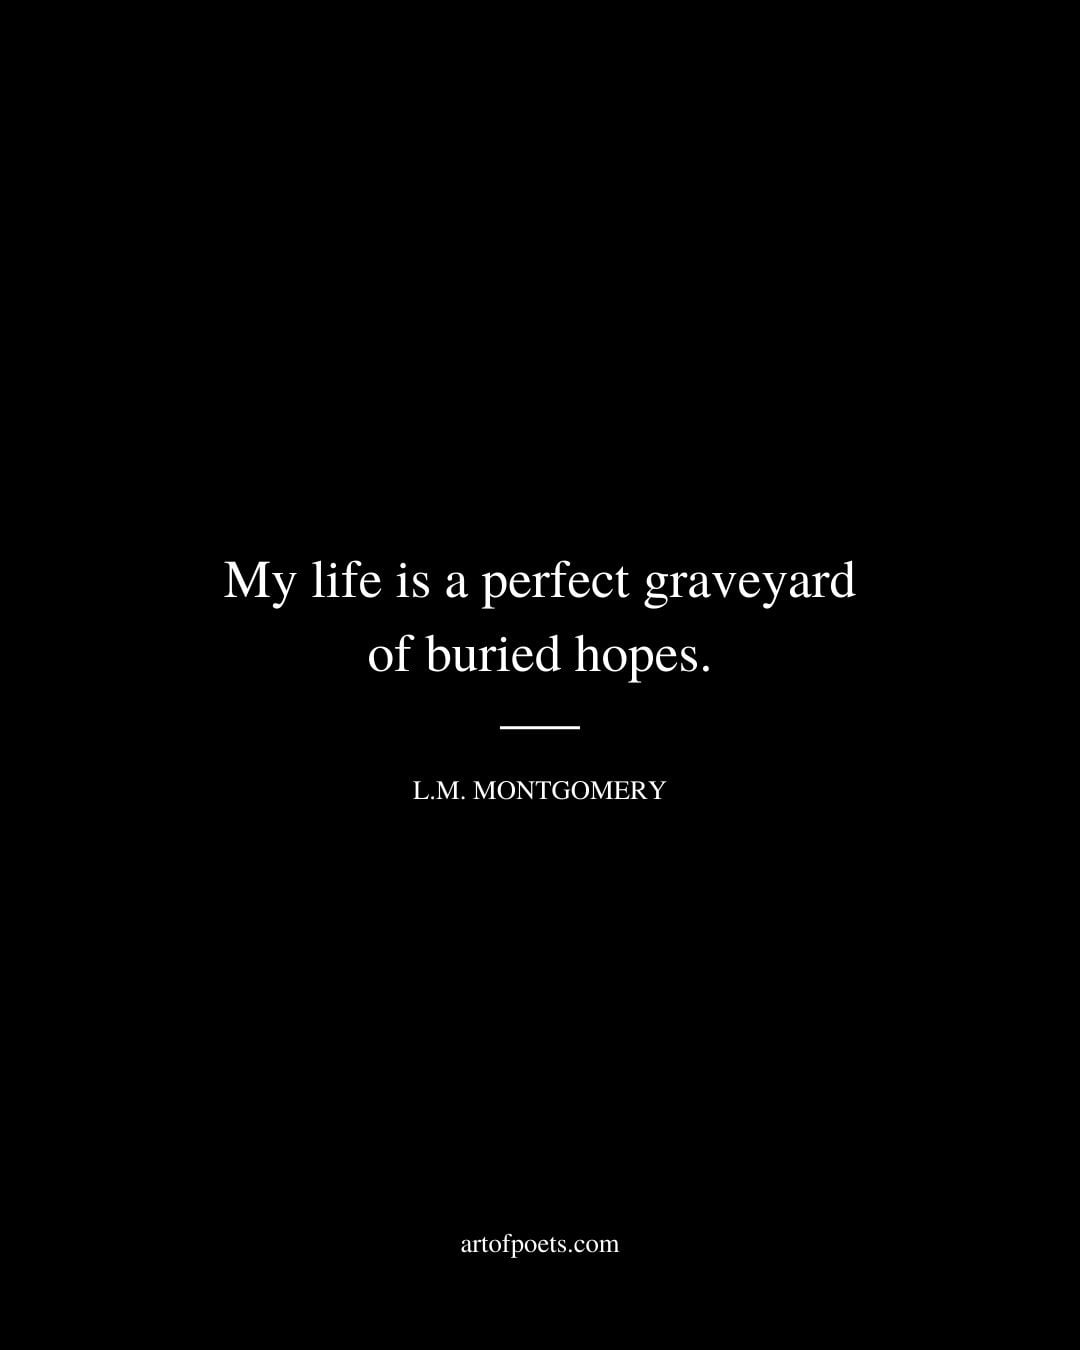 My life is a perfect graveyard of buried hopes. L.M. Montgomery